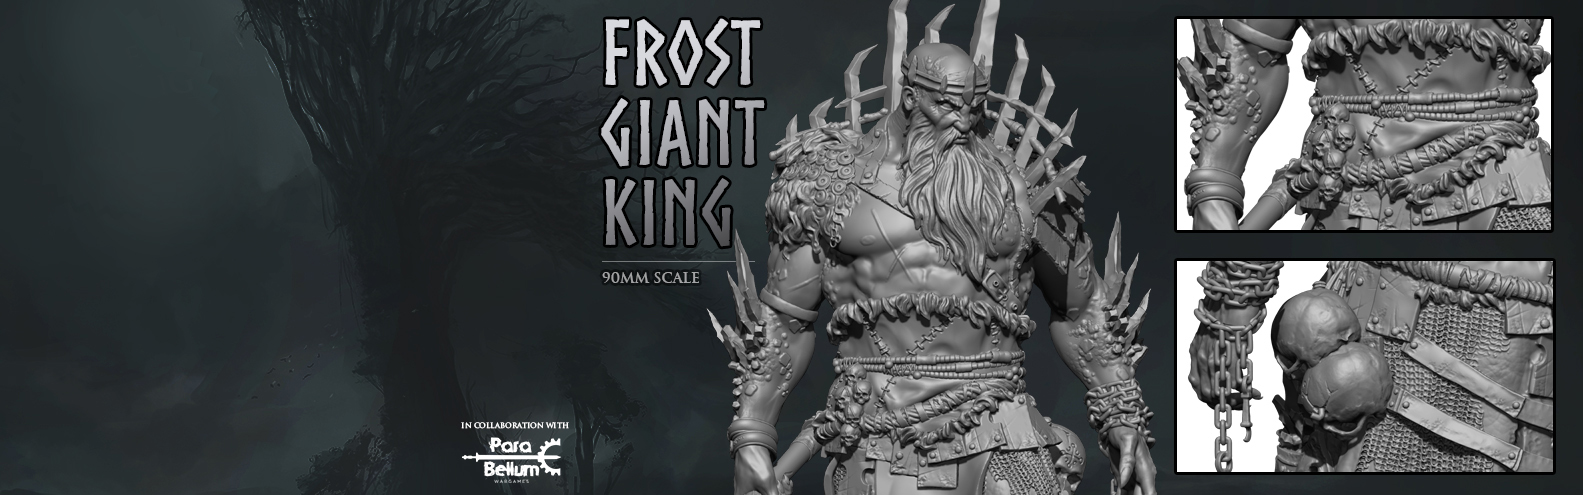 Frost Giant King_ Michael Kontraros Collectibles